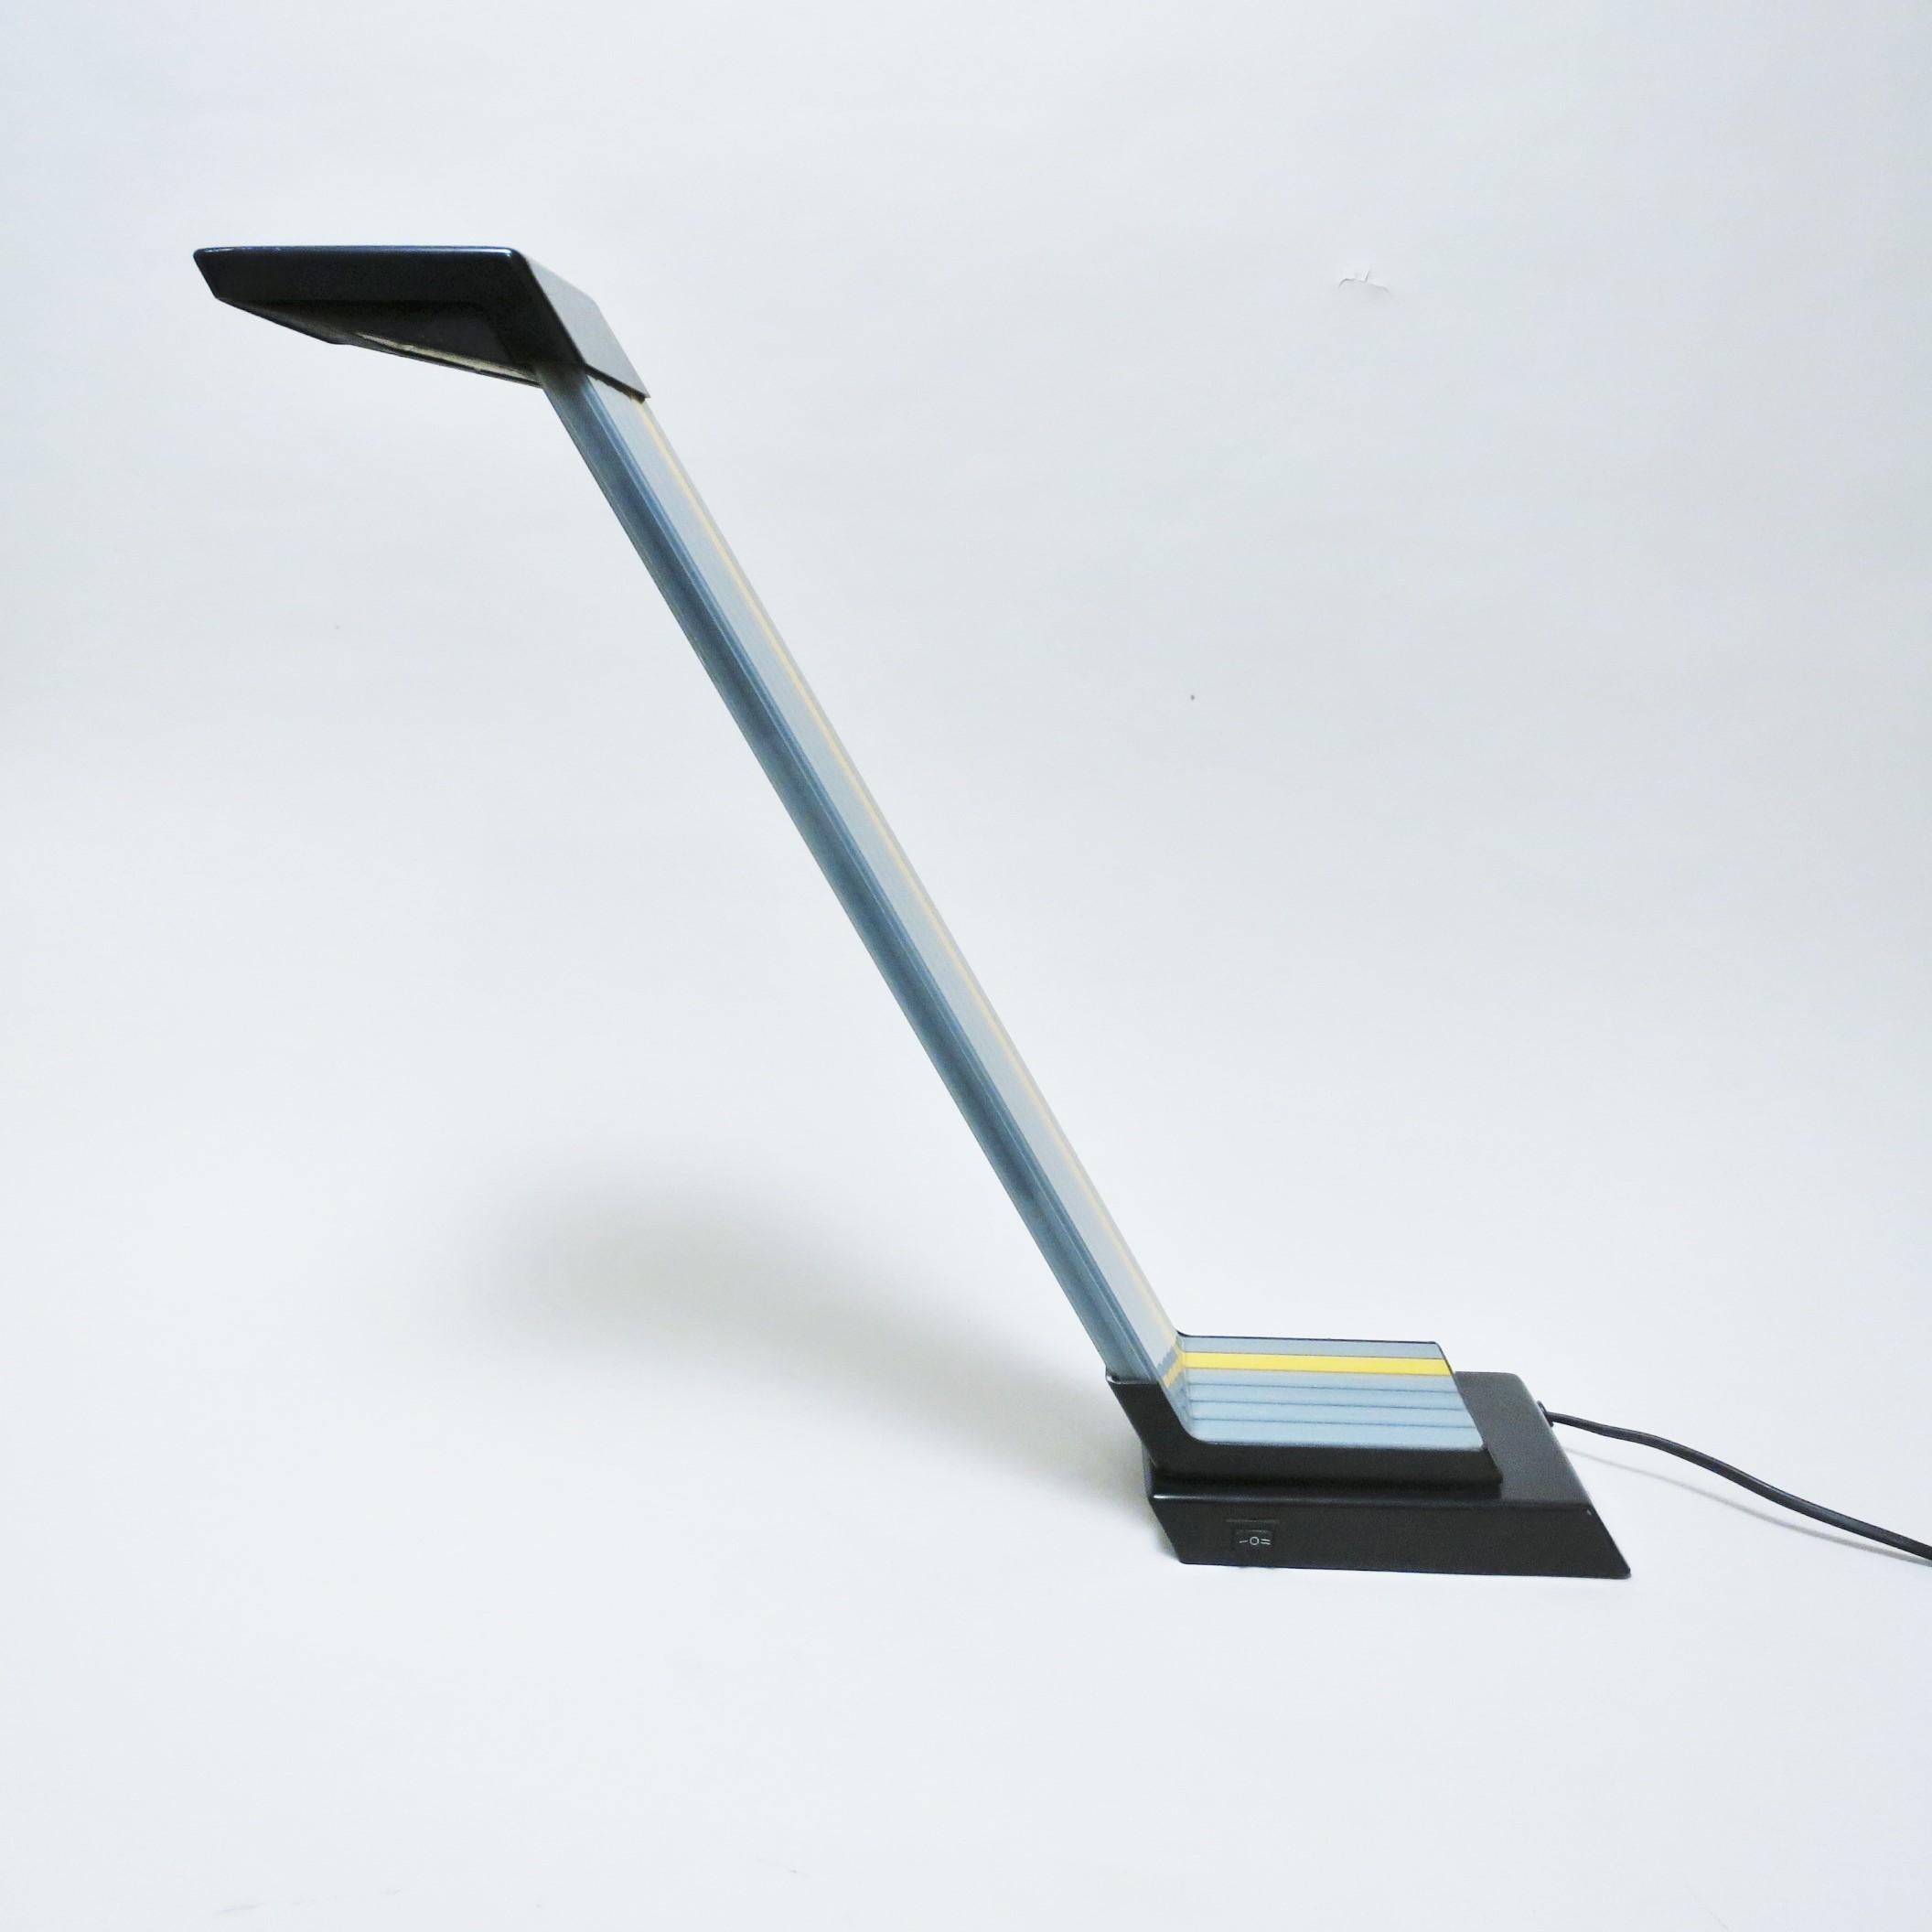 Postmodern desk lamp 1980 in memphos style by French designer JD Aznar (labelled JD Aznar) in grey and yellow plexiglas body and metal base and diffusor.